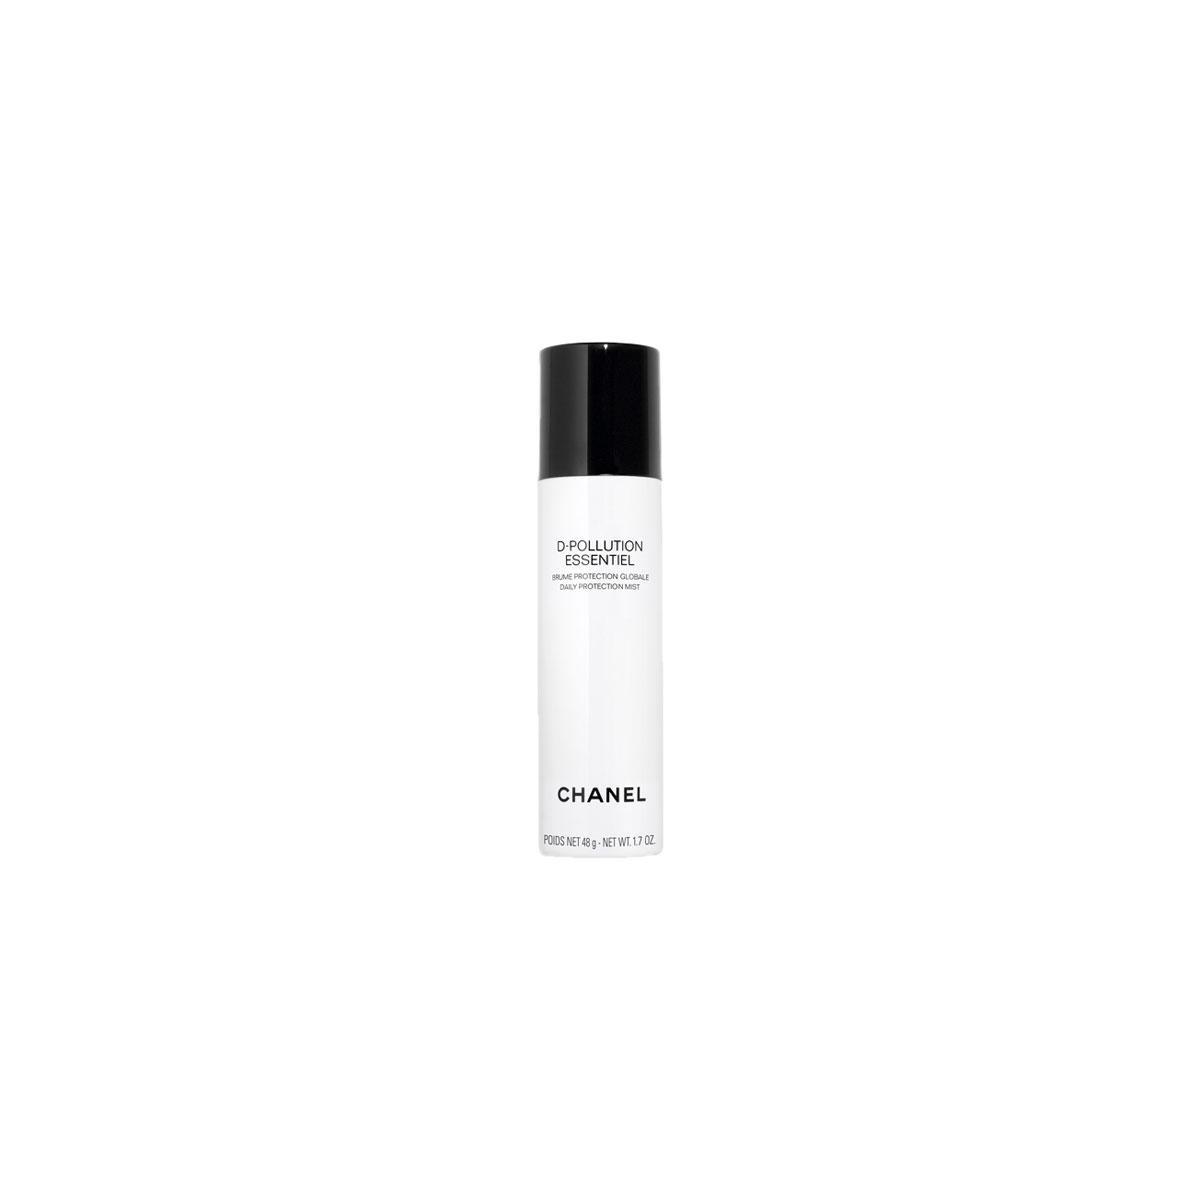 D-Pollution Essential Global Protection Mist, Chanel, 57 euro voor 50 ml.